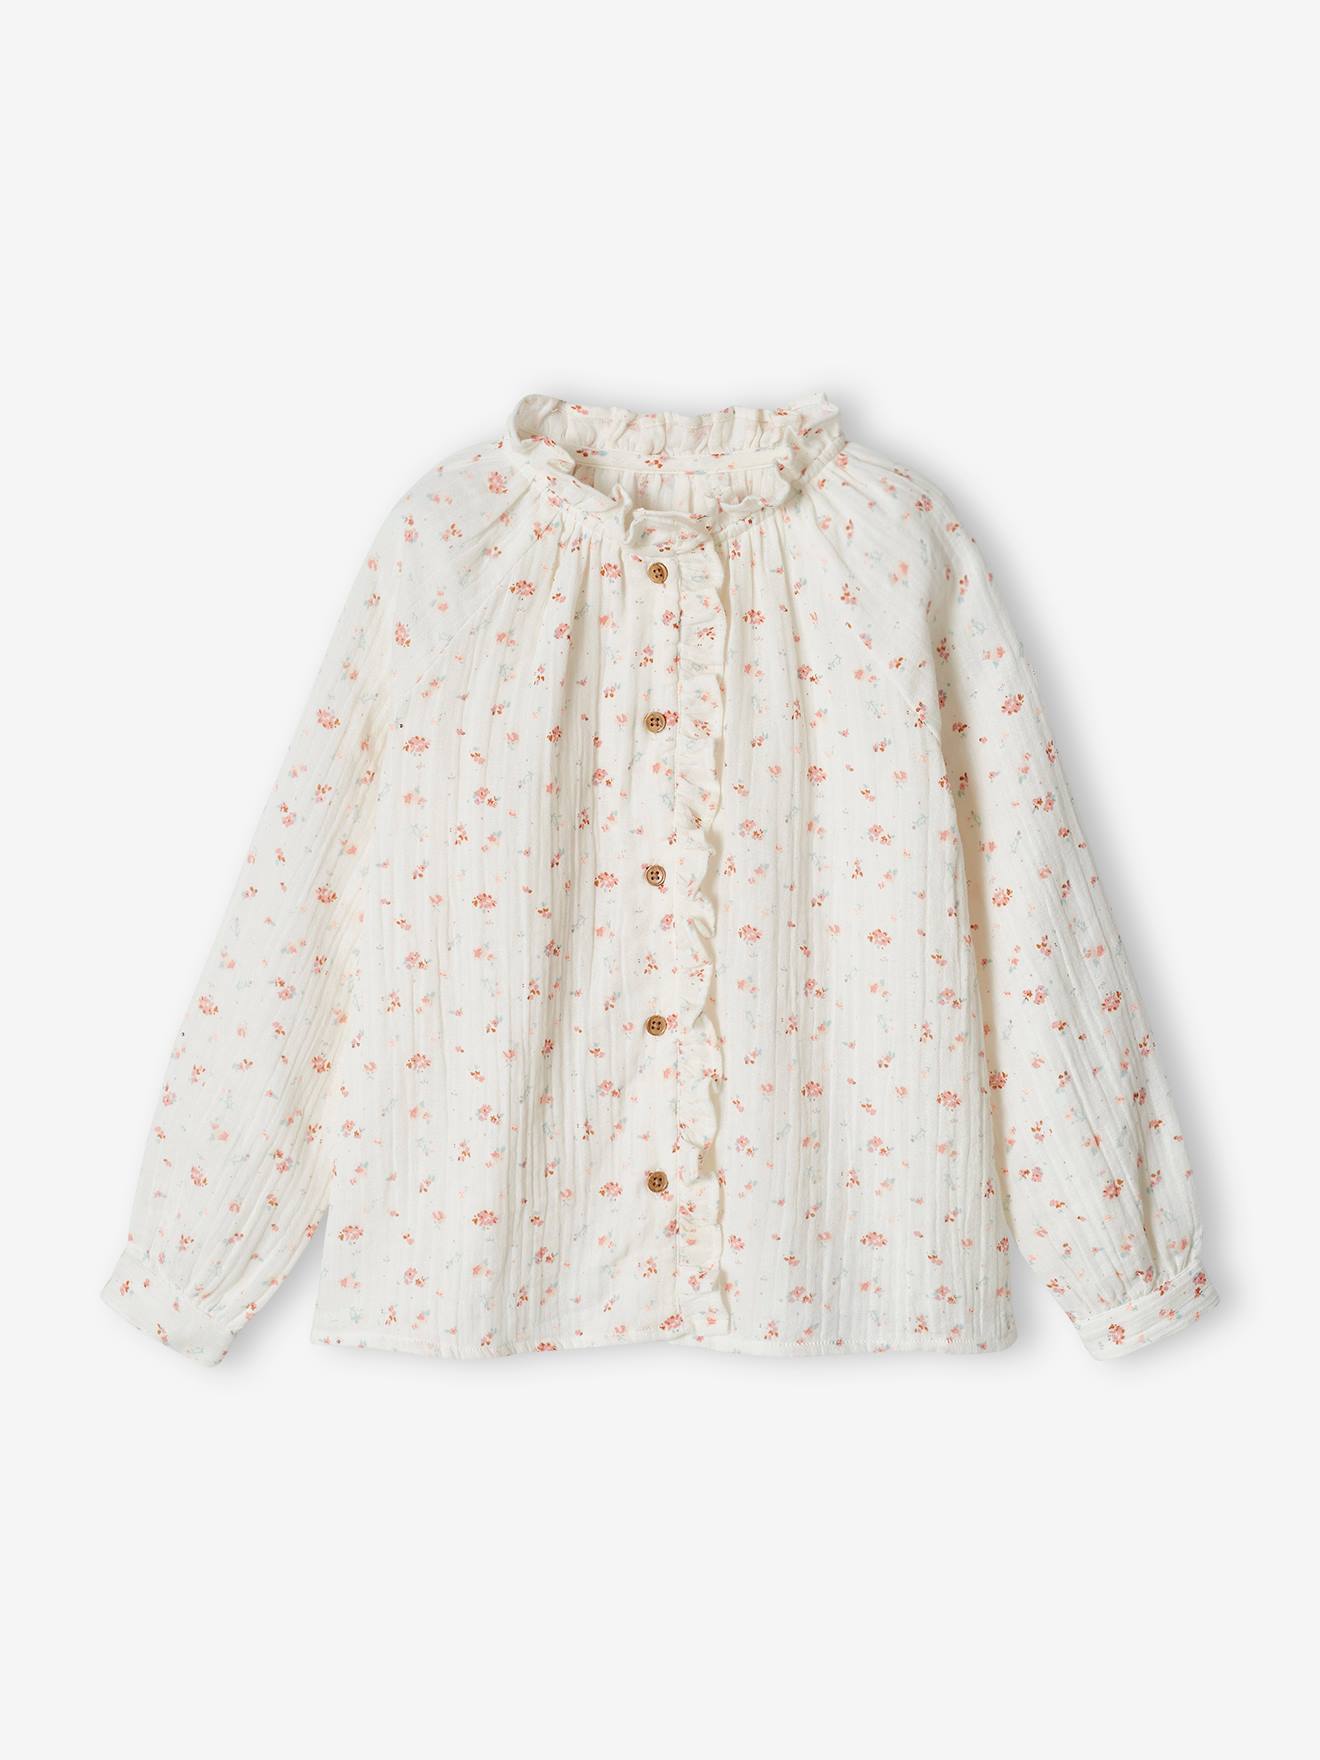 Blouse in Cotton Gauze with Ruffles & Floral Print, for Girls ecru